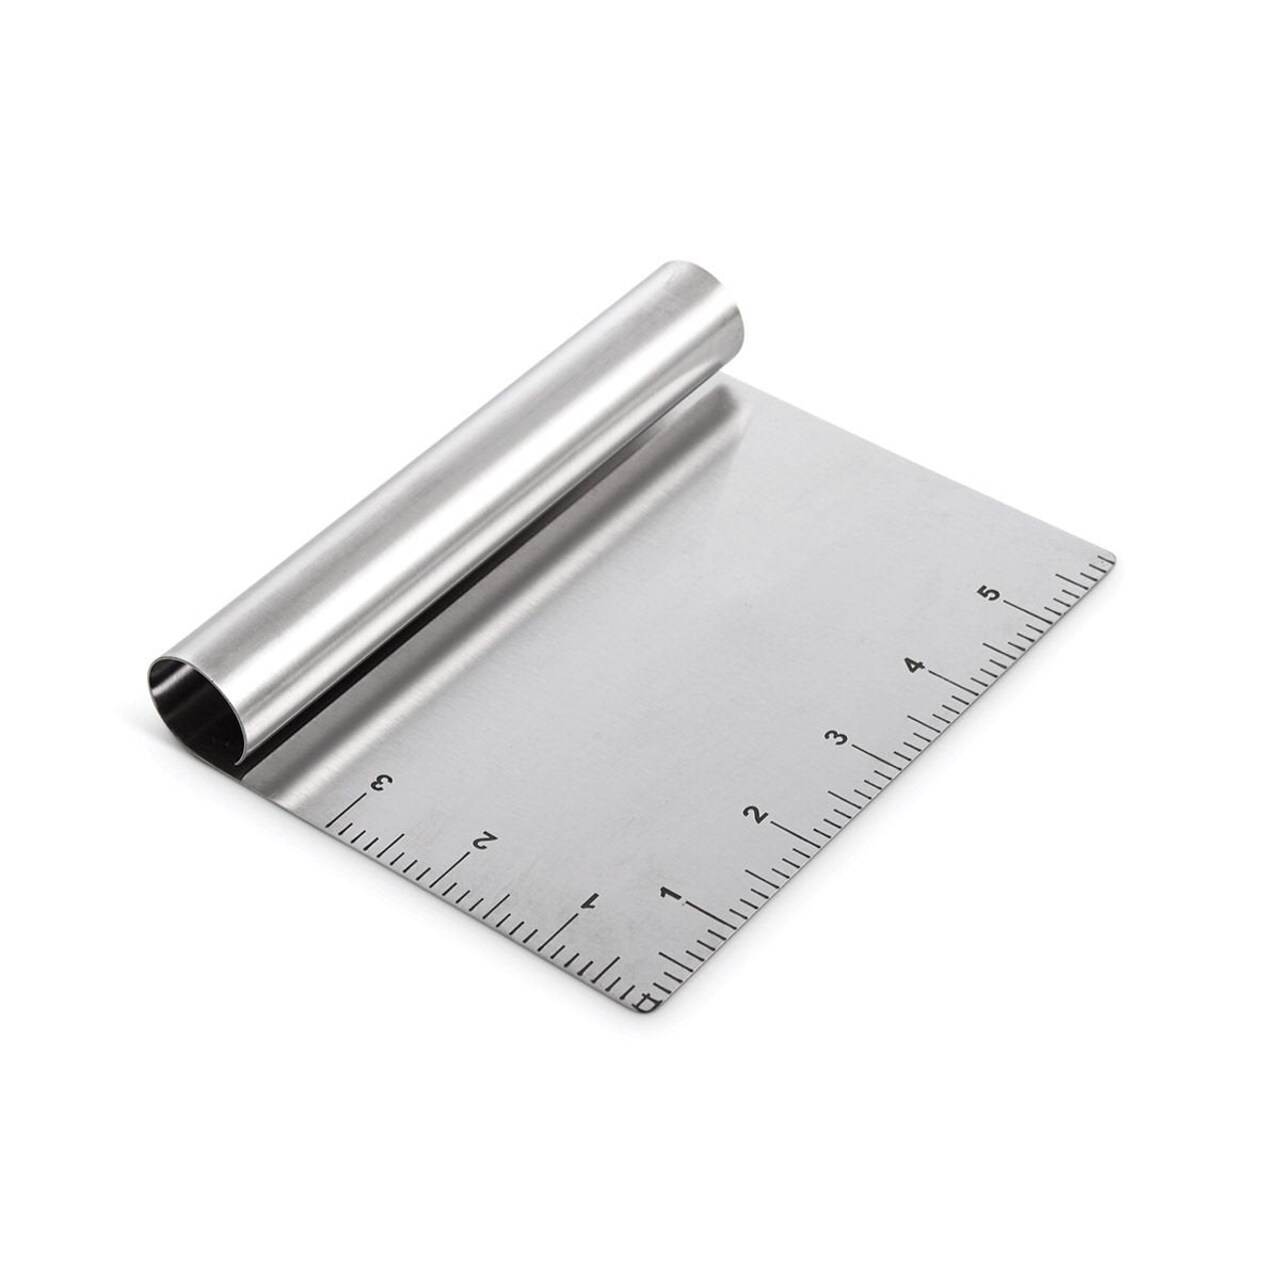 Mrs Anderson's 6 Wide Stainless Steel Pastry Dough Cutter Bench Scraper  with Ruler